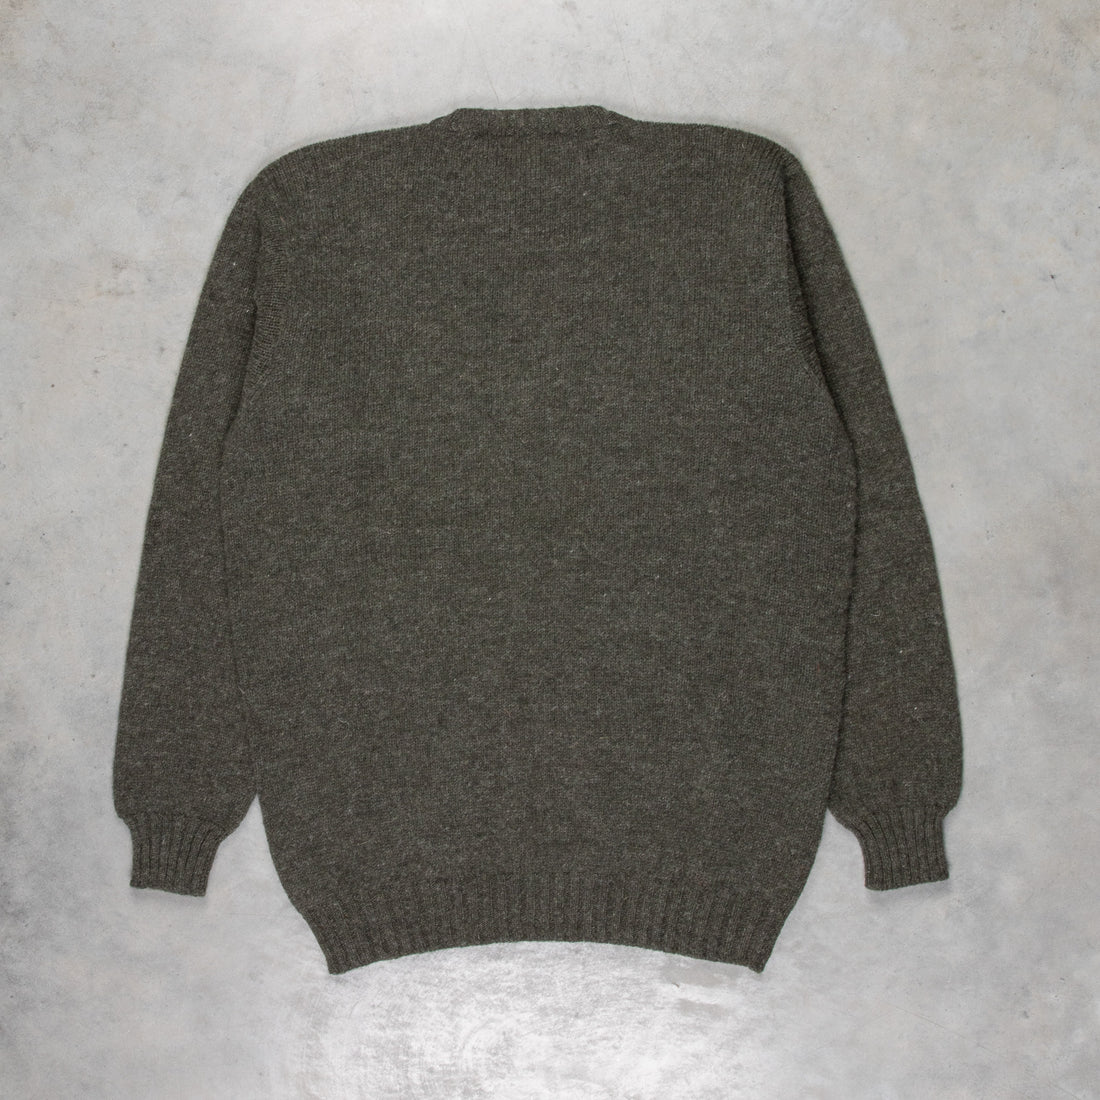 Laurence J. Smith Super soft Seamless Crew Neck Pullover Spruce